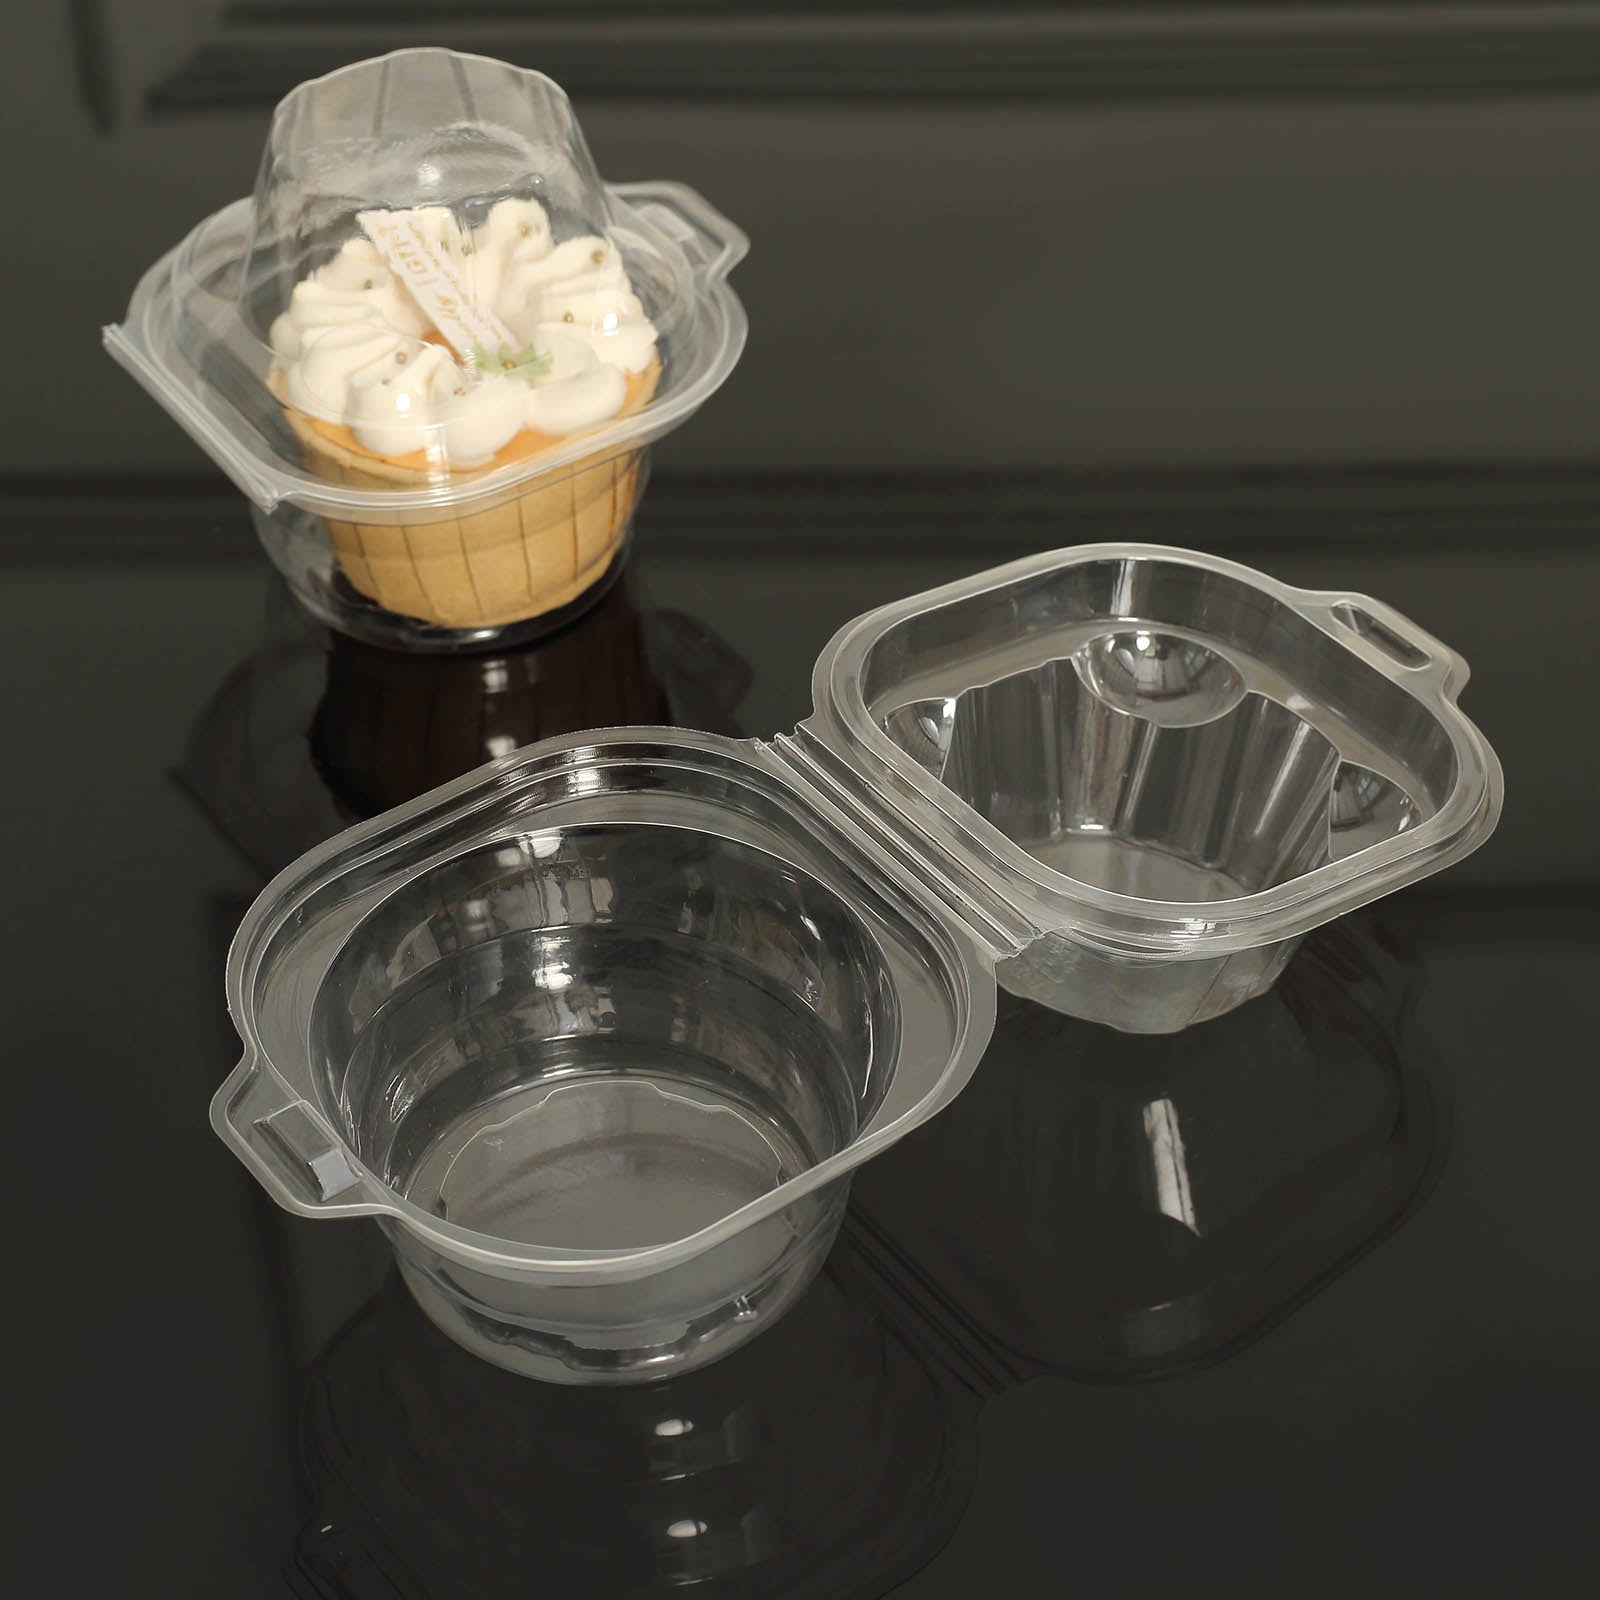 Efavormart 50 Pack | Clear / Gold Square Mini Plastic Dessert Party Favor  Boxes, Cupcake Muffin Food Containers - 4X4X2.5